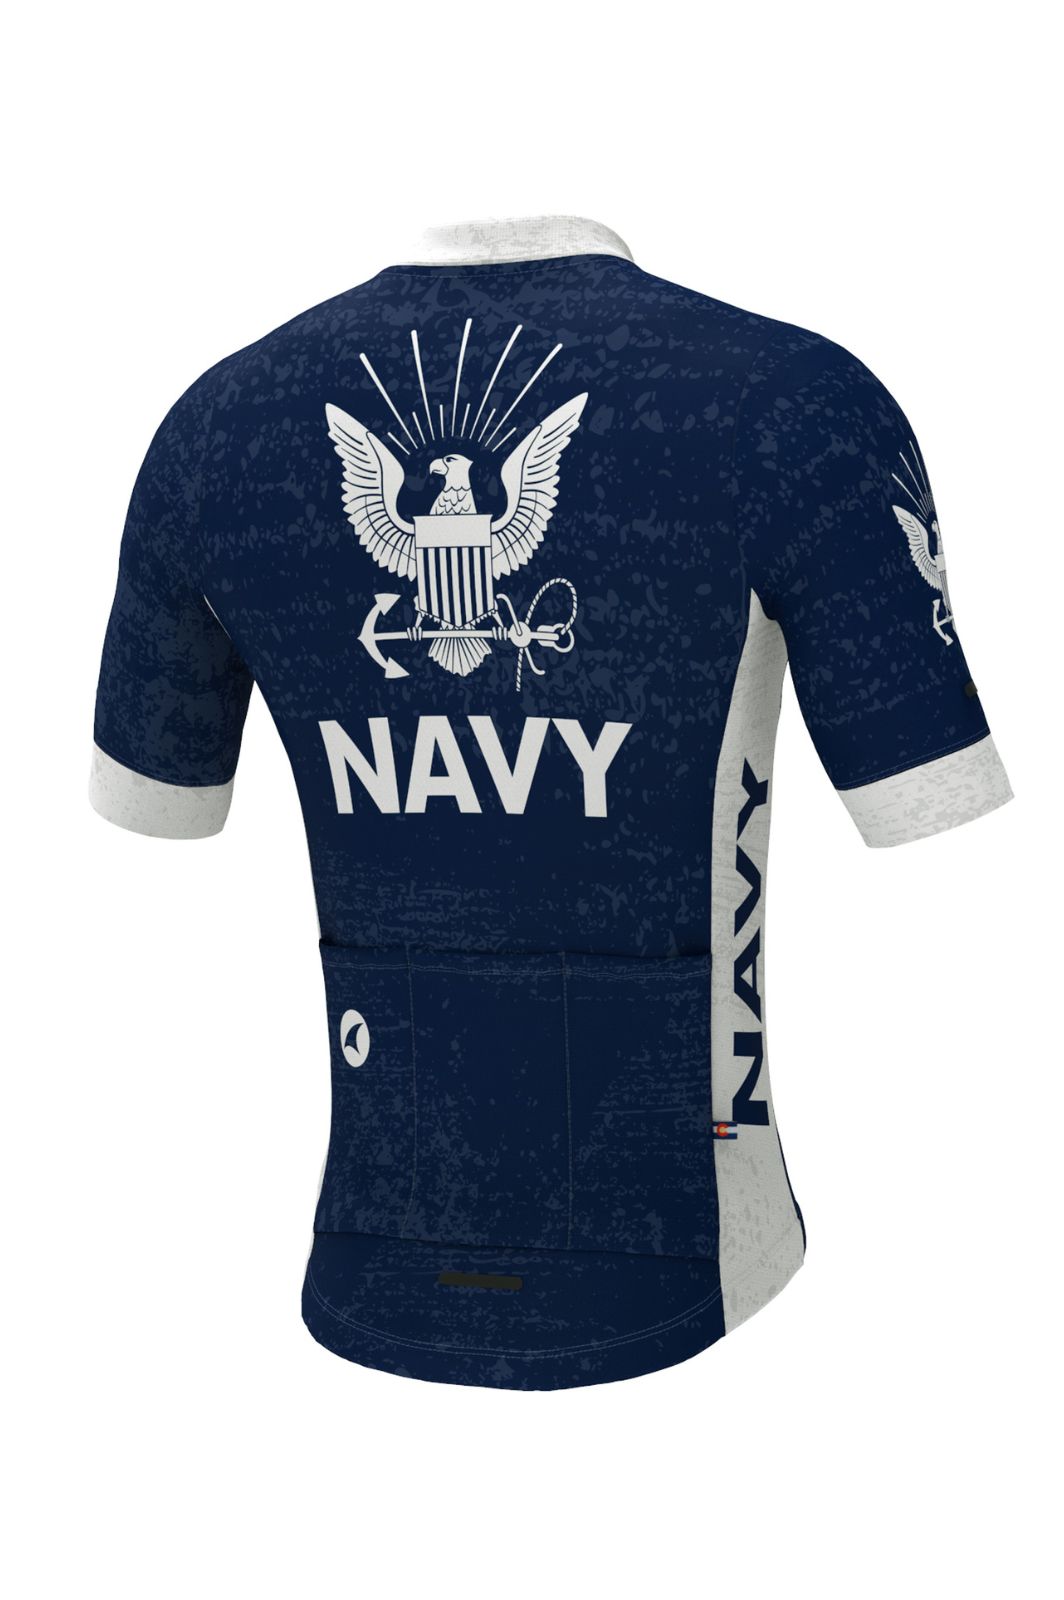 Men's US Navy Cycling Jersey - Ascent Aero Back View